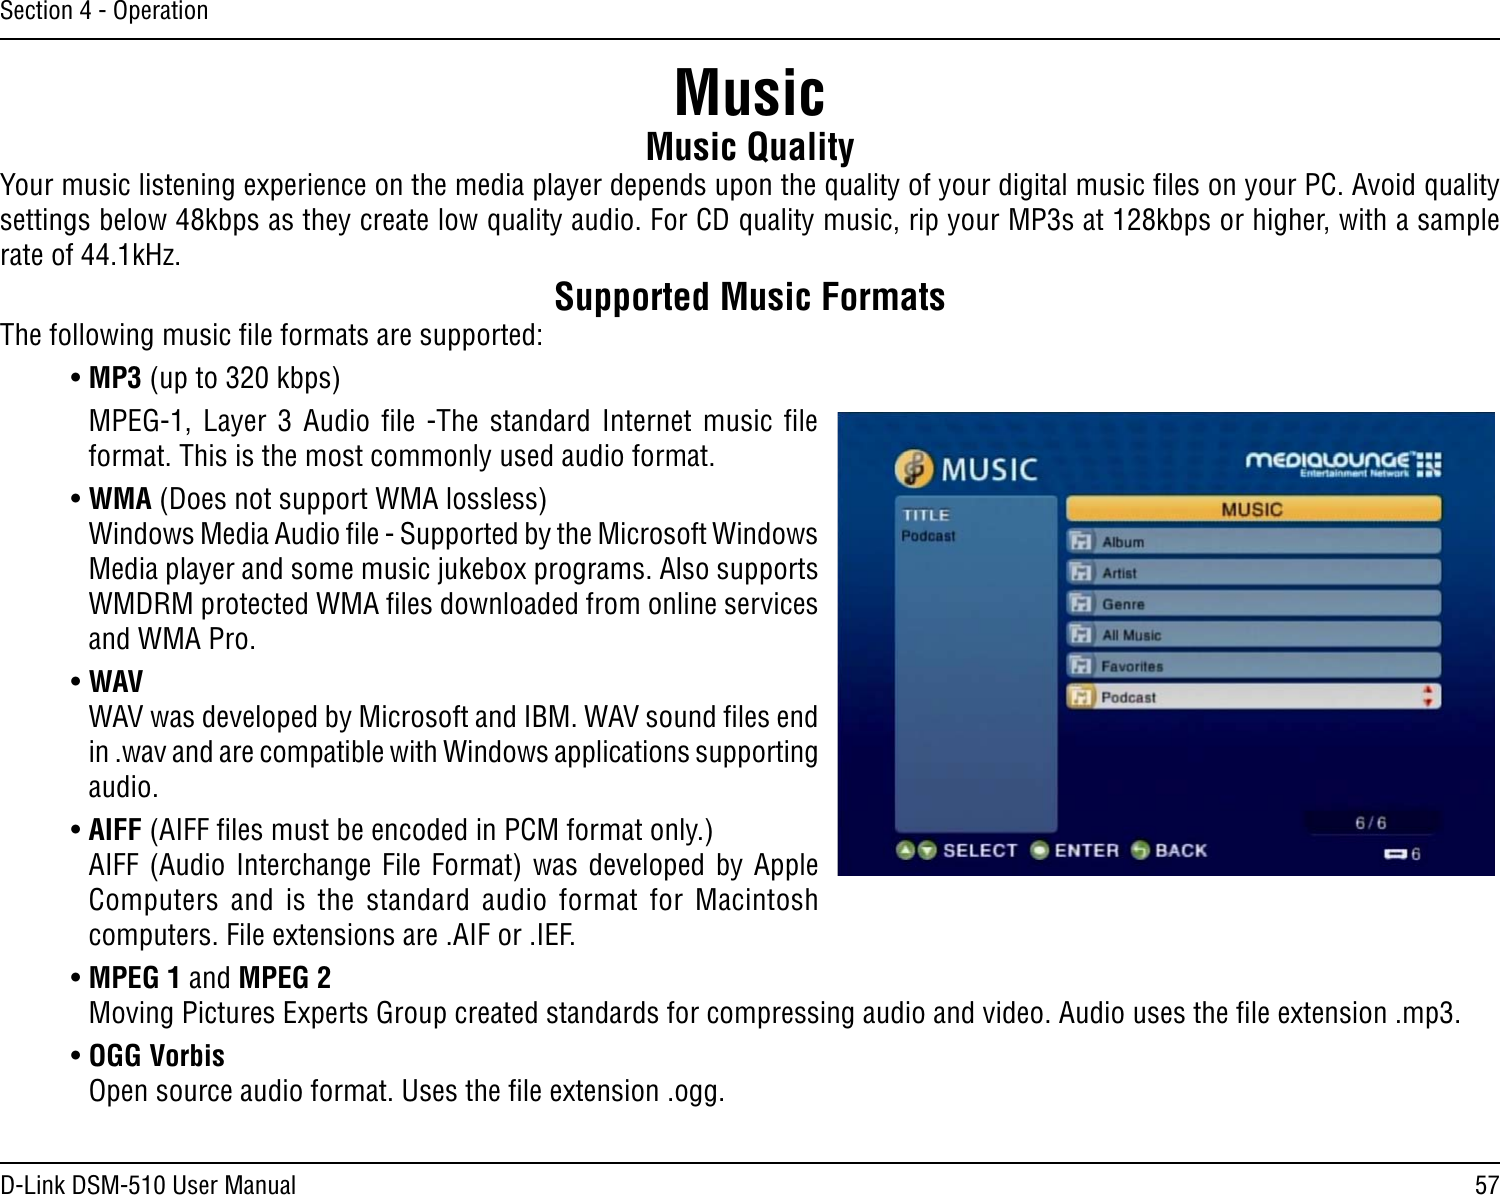 57D-Link DSM-510 User ManualSection 4 - OperationMusic QualityYour music listening experience on the media player depends upon the quality of your digital music ﬁles on your PC. Avoid quality settings below 48kbps as they create low quality audio. For CD quality music, rip your MP3s at 128kbps or higher, with a sample rate of 44.1kHz.Supported Music FormatsThe following music ﬁle formats are supported:• MP3 (up to 320 kbps)MPEG-1,  Layer  3  Audio  ﬁle  -The  standard  Internet  music  ﬁle format. This is the most commonly used audio format.• WMA (Does not support WMA lossless)   Windows Media Audio ﬁle - Supported by the Microsoft Windows Media player and some music jukebox programs. Also supports WMDRM protected WMA ﬁles downloaded from online services and WMA Pro.• WAV  WAV was developed by Microsoft and IBM. WAV sound ﬁles end in .wav and are compatible with Windows applications supporting audio.• AIFF (AIFF ﬁles must be encoded in PCM format only.)  AIFF (Audio Interchange File Format) was developed by Apple Computers  and  is  the  standard  audio  format  for  Macintosh computers. File extensions are .AIF or .IEF.• MPEG 1 and MPEG 2   Moving Pictures Experts Group created standards for compressing audio and video. Audio uses the ﬁle extension .mp3.• OGG Vorbis   Open source audio format. Uses the ﬁle extension .ogg.  Music